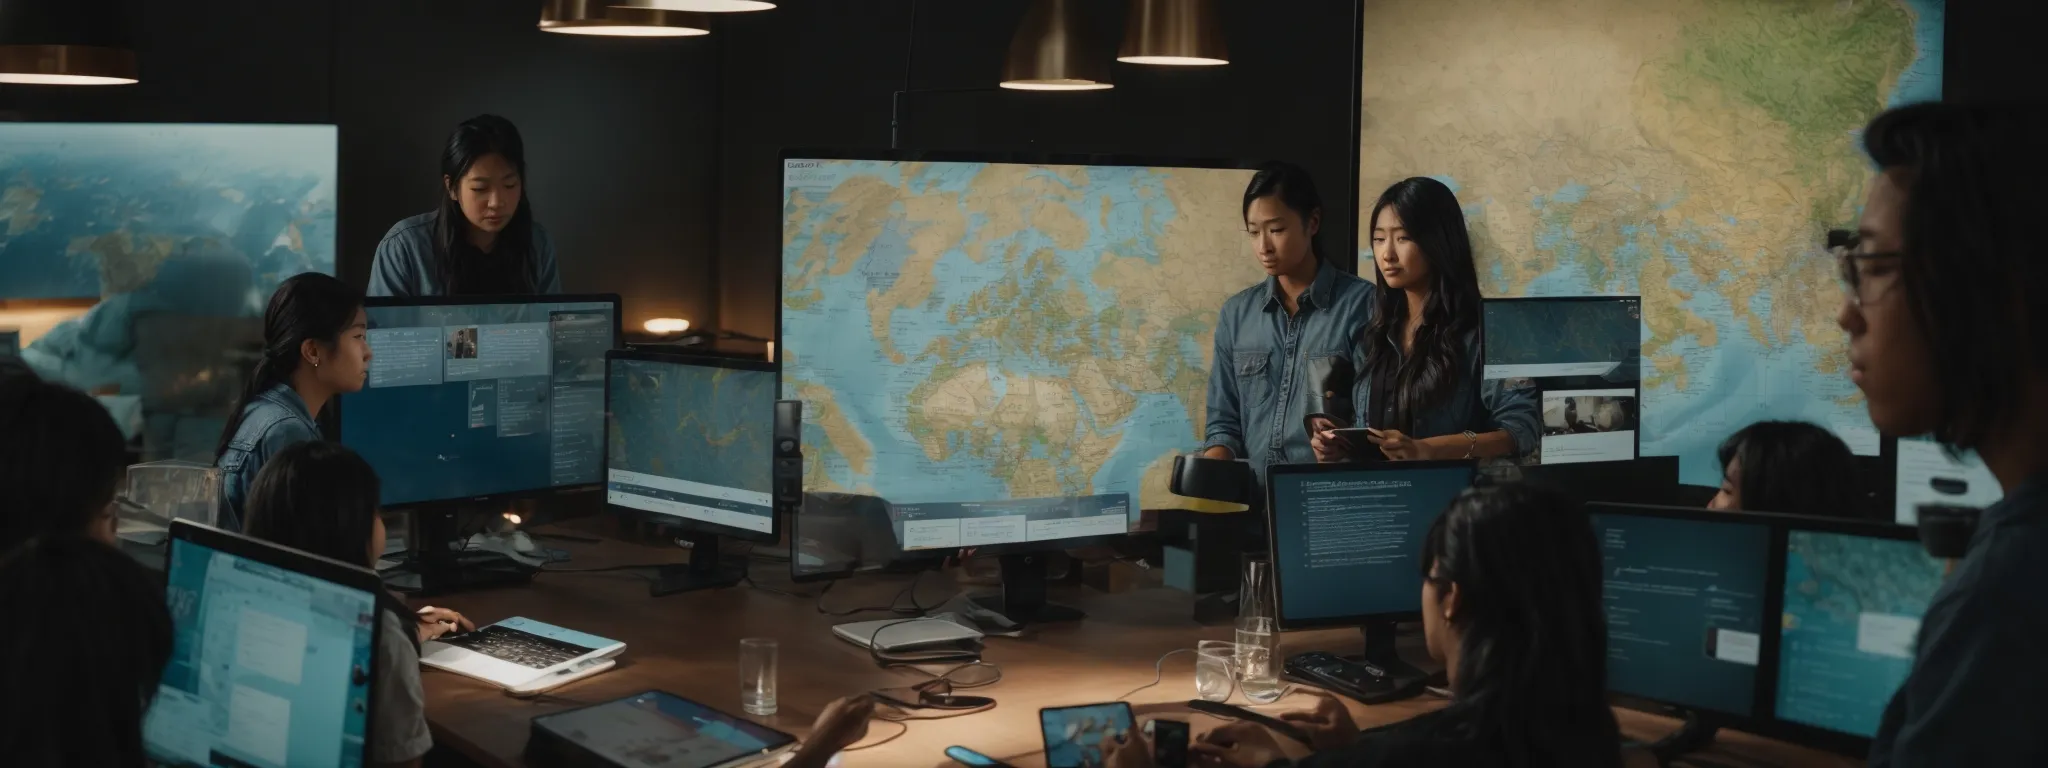 a group of diverse people engaging with a user-friendly digital interface on various devices around a table illuminated by an overhead world map.